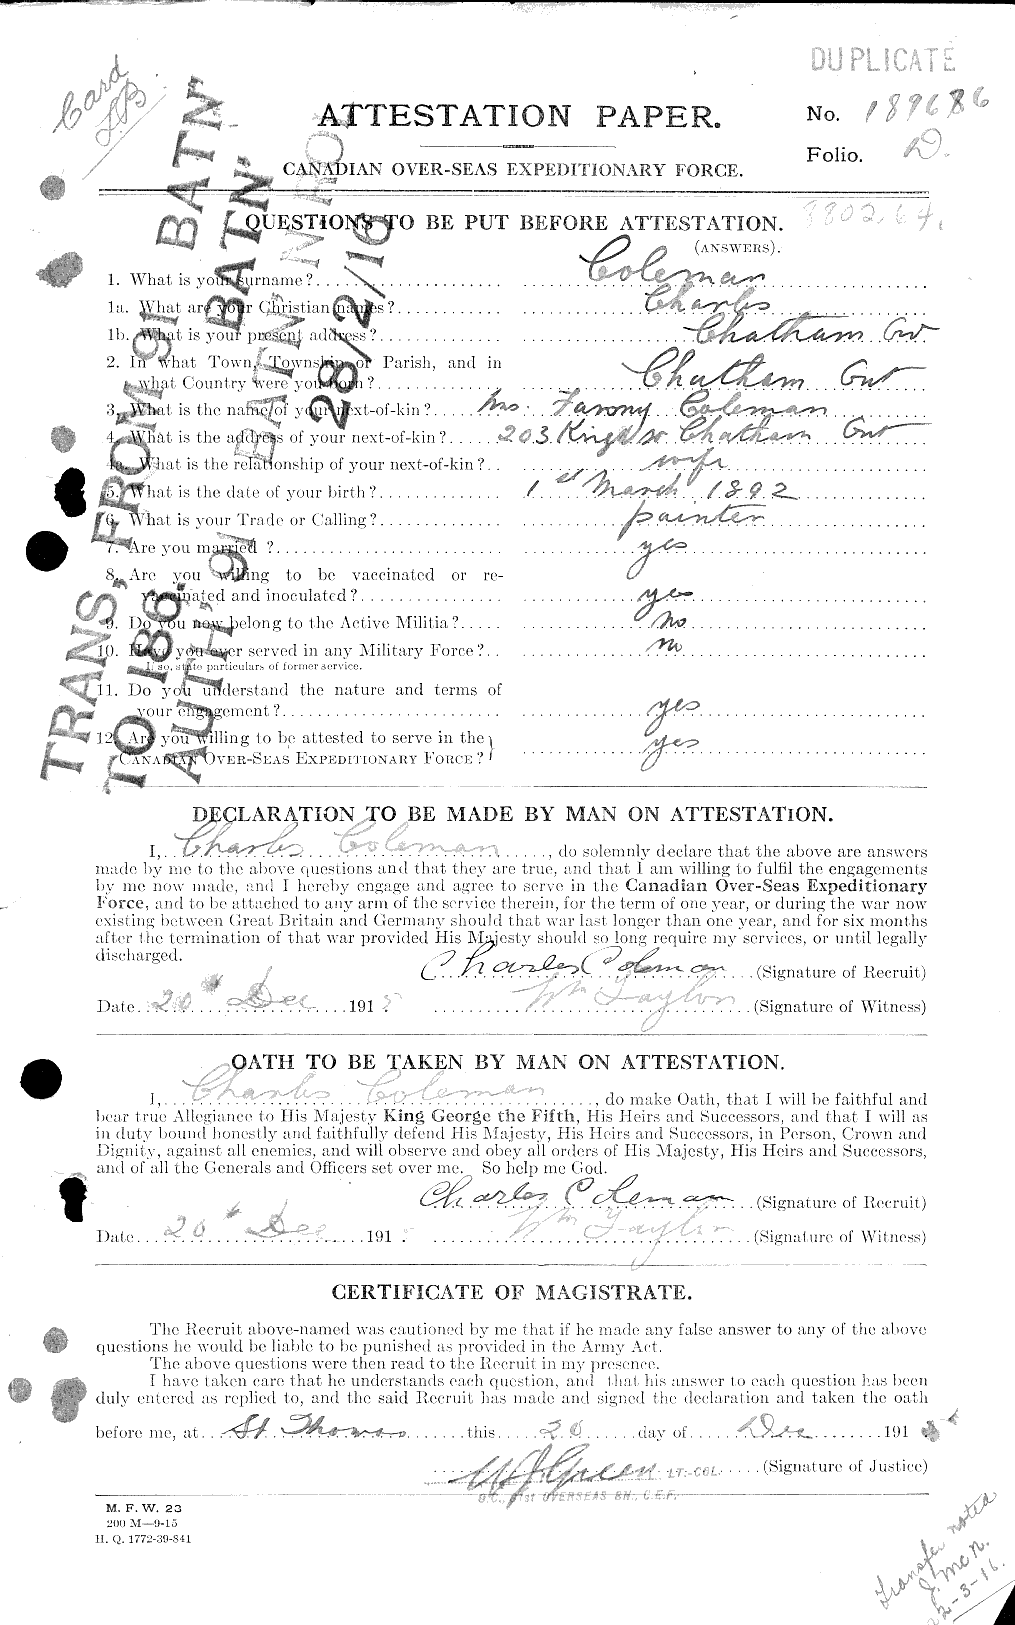 Personnel Records of the First World War - CEF 028073a